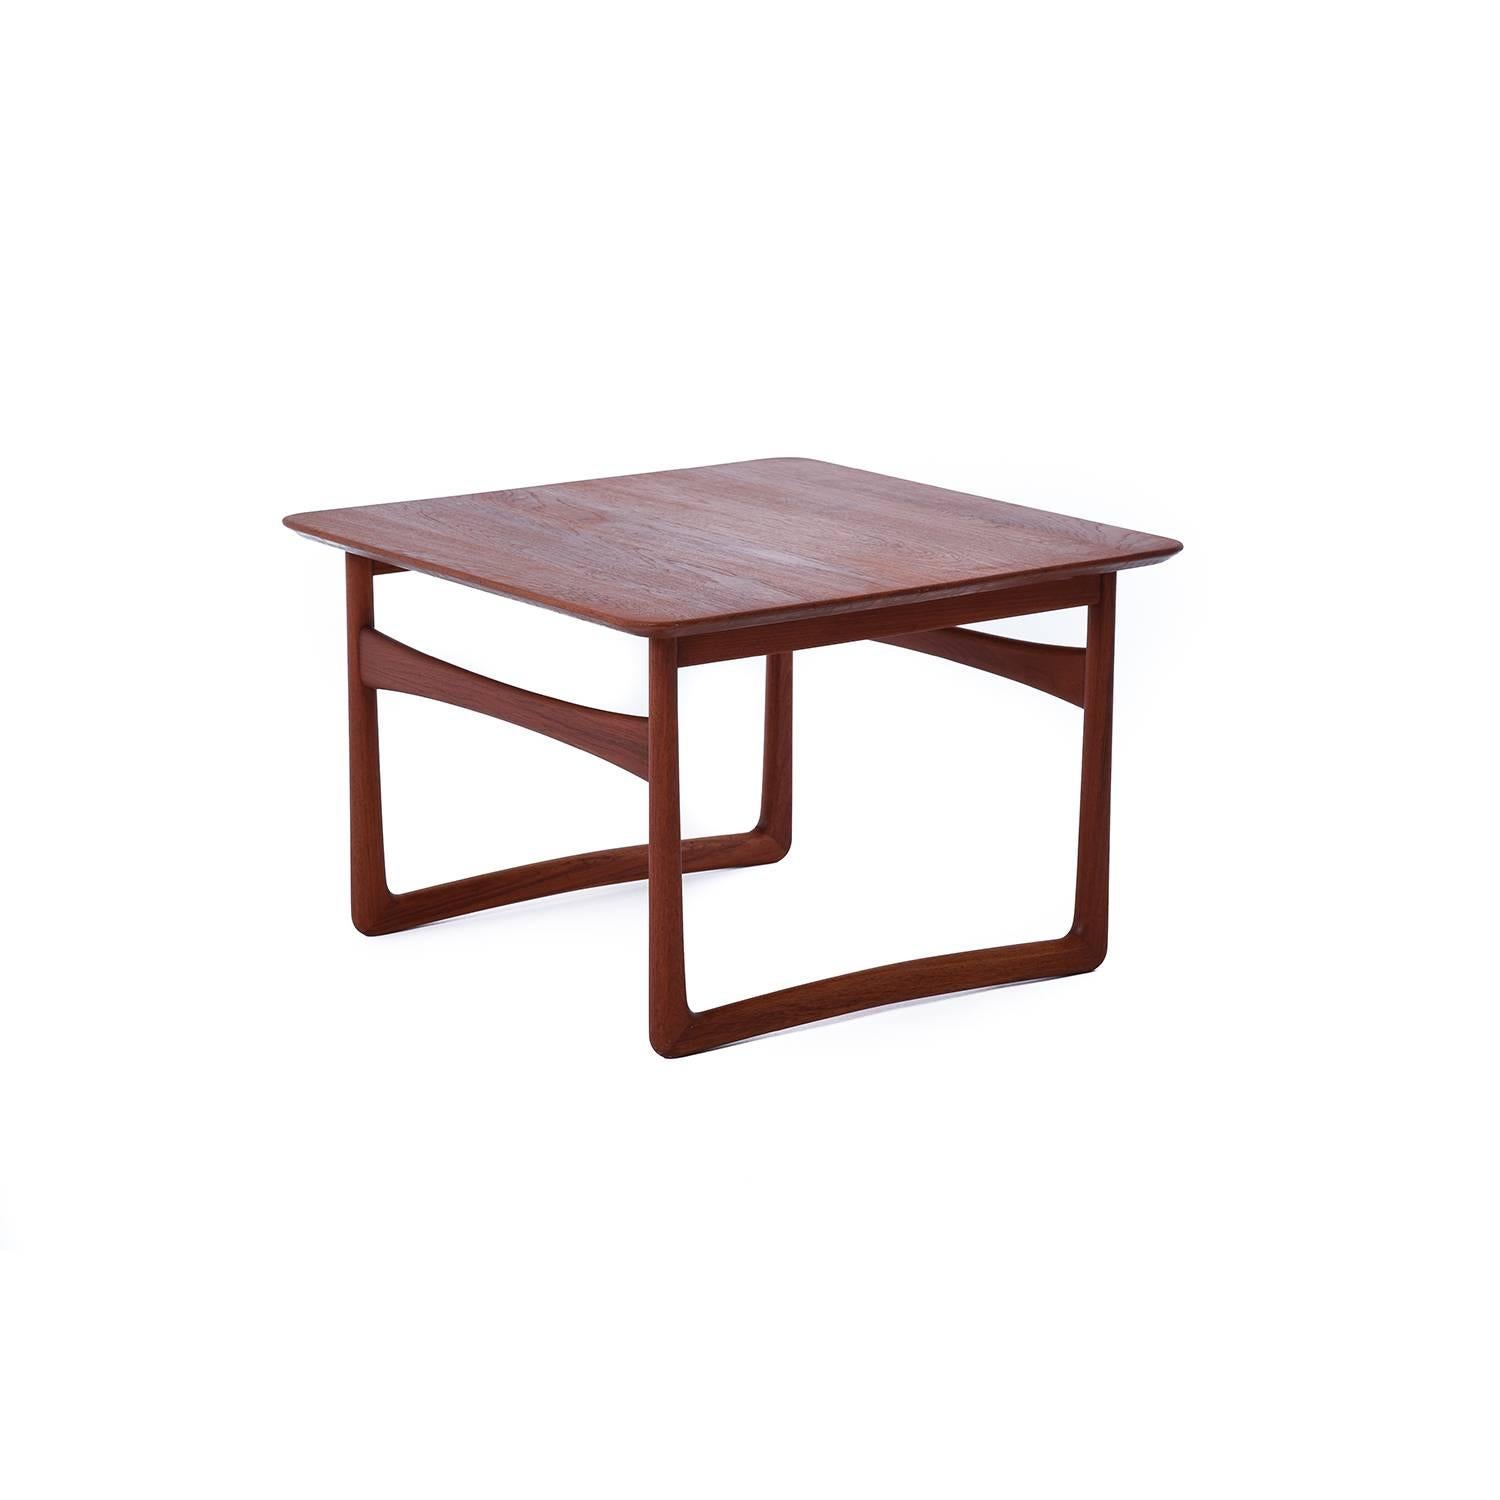 This solid teak side table makes a statement with it's sculptural sleigh base.